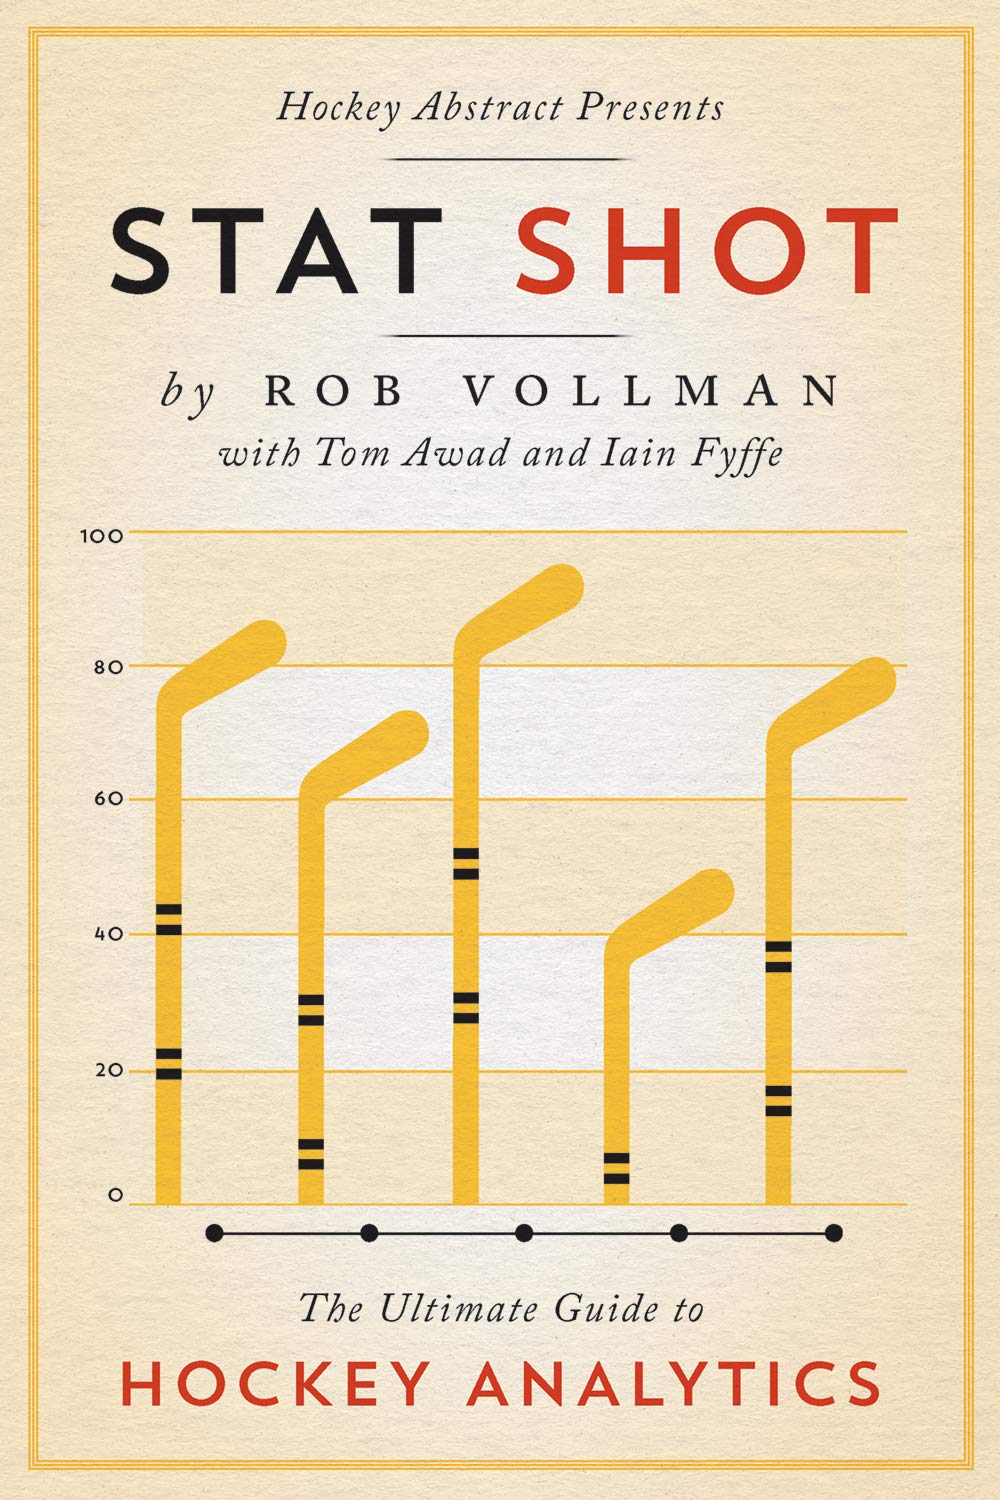 Hockey Abstract Presents: Stat Shot: The Ultimate Guide to Hockey Analytics| Books About & Relating To Sports | SPMA Shelf